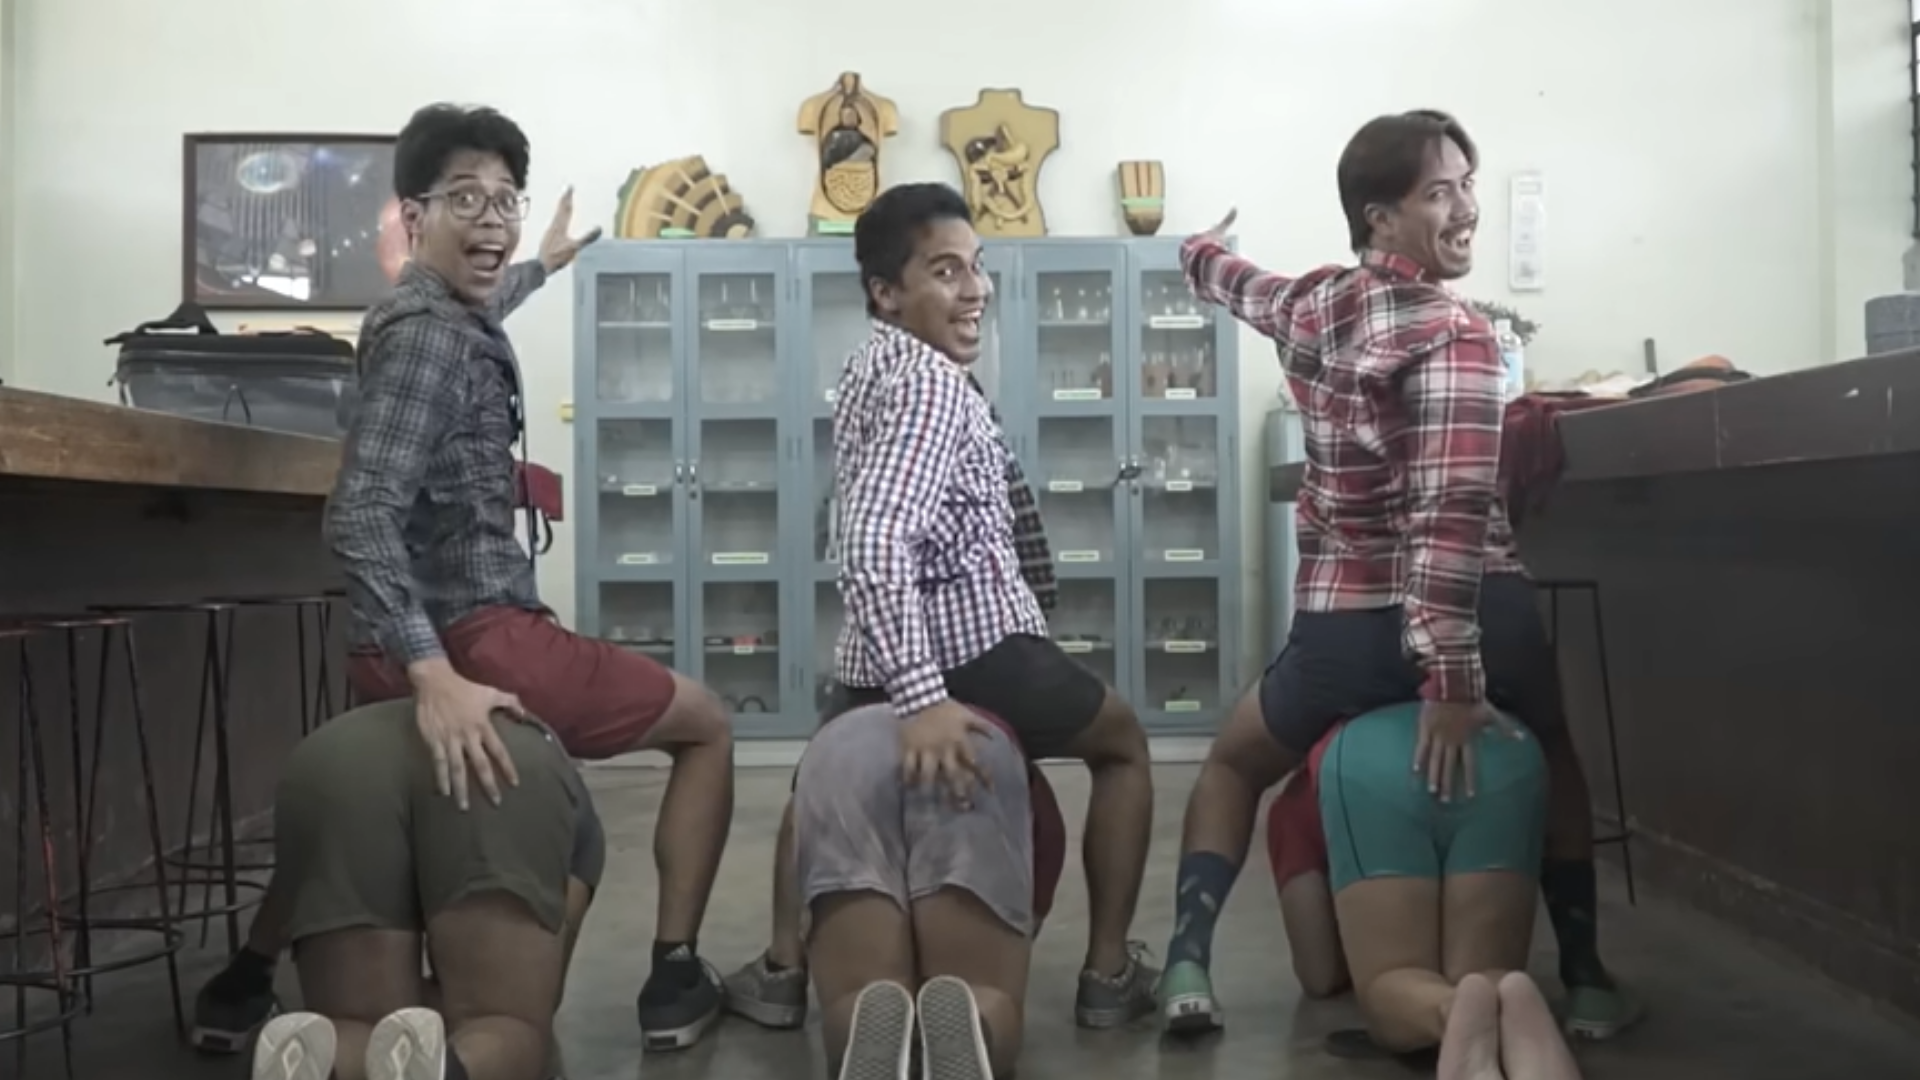 WATCH: Hilarious Spoof of 3 Idiots’s ‘All is Well’ Dance Video